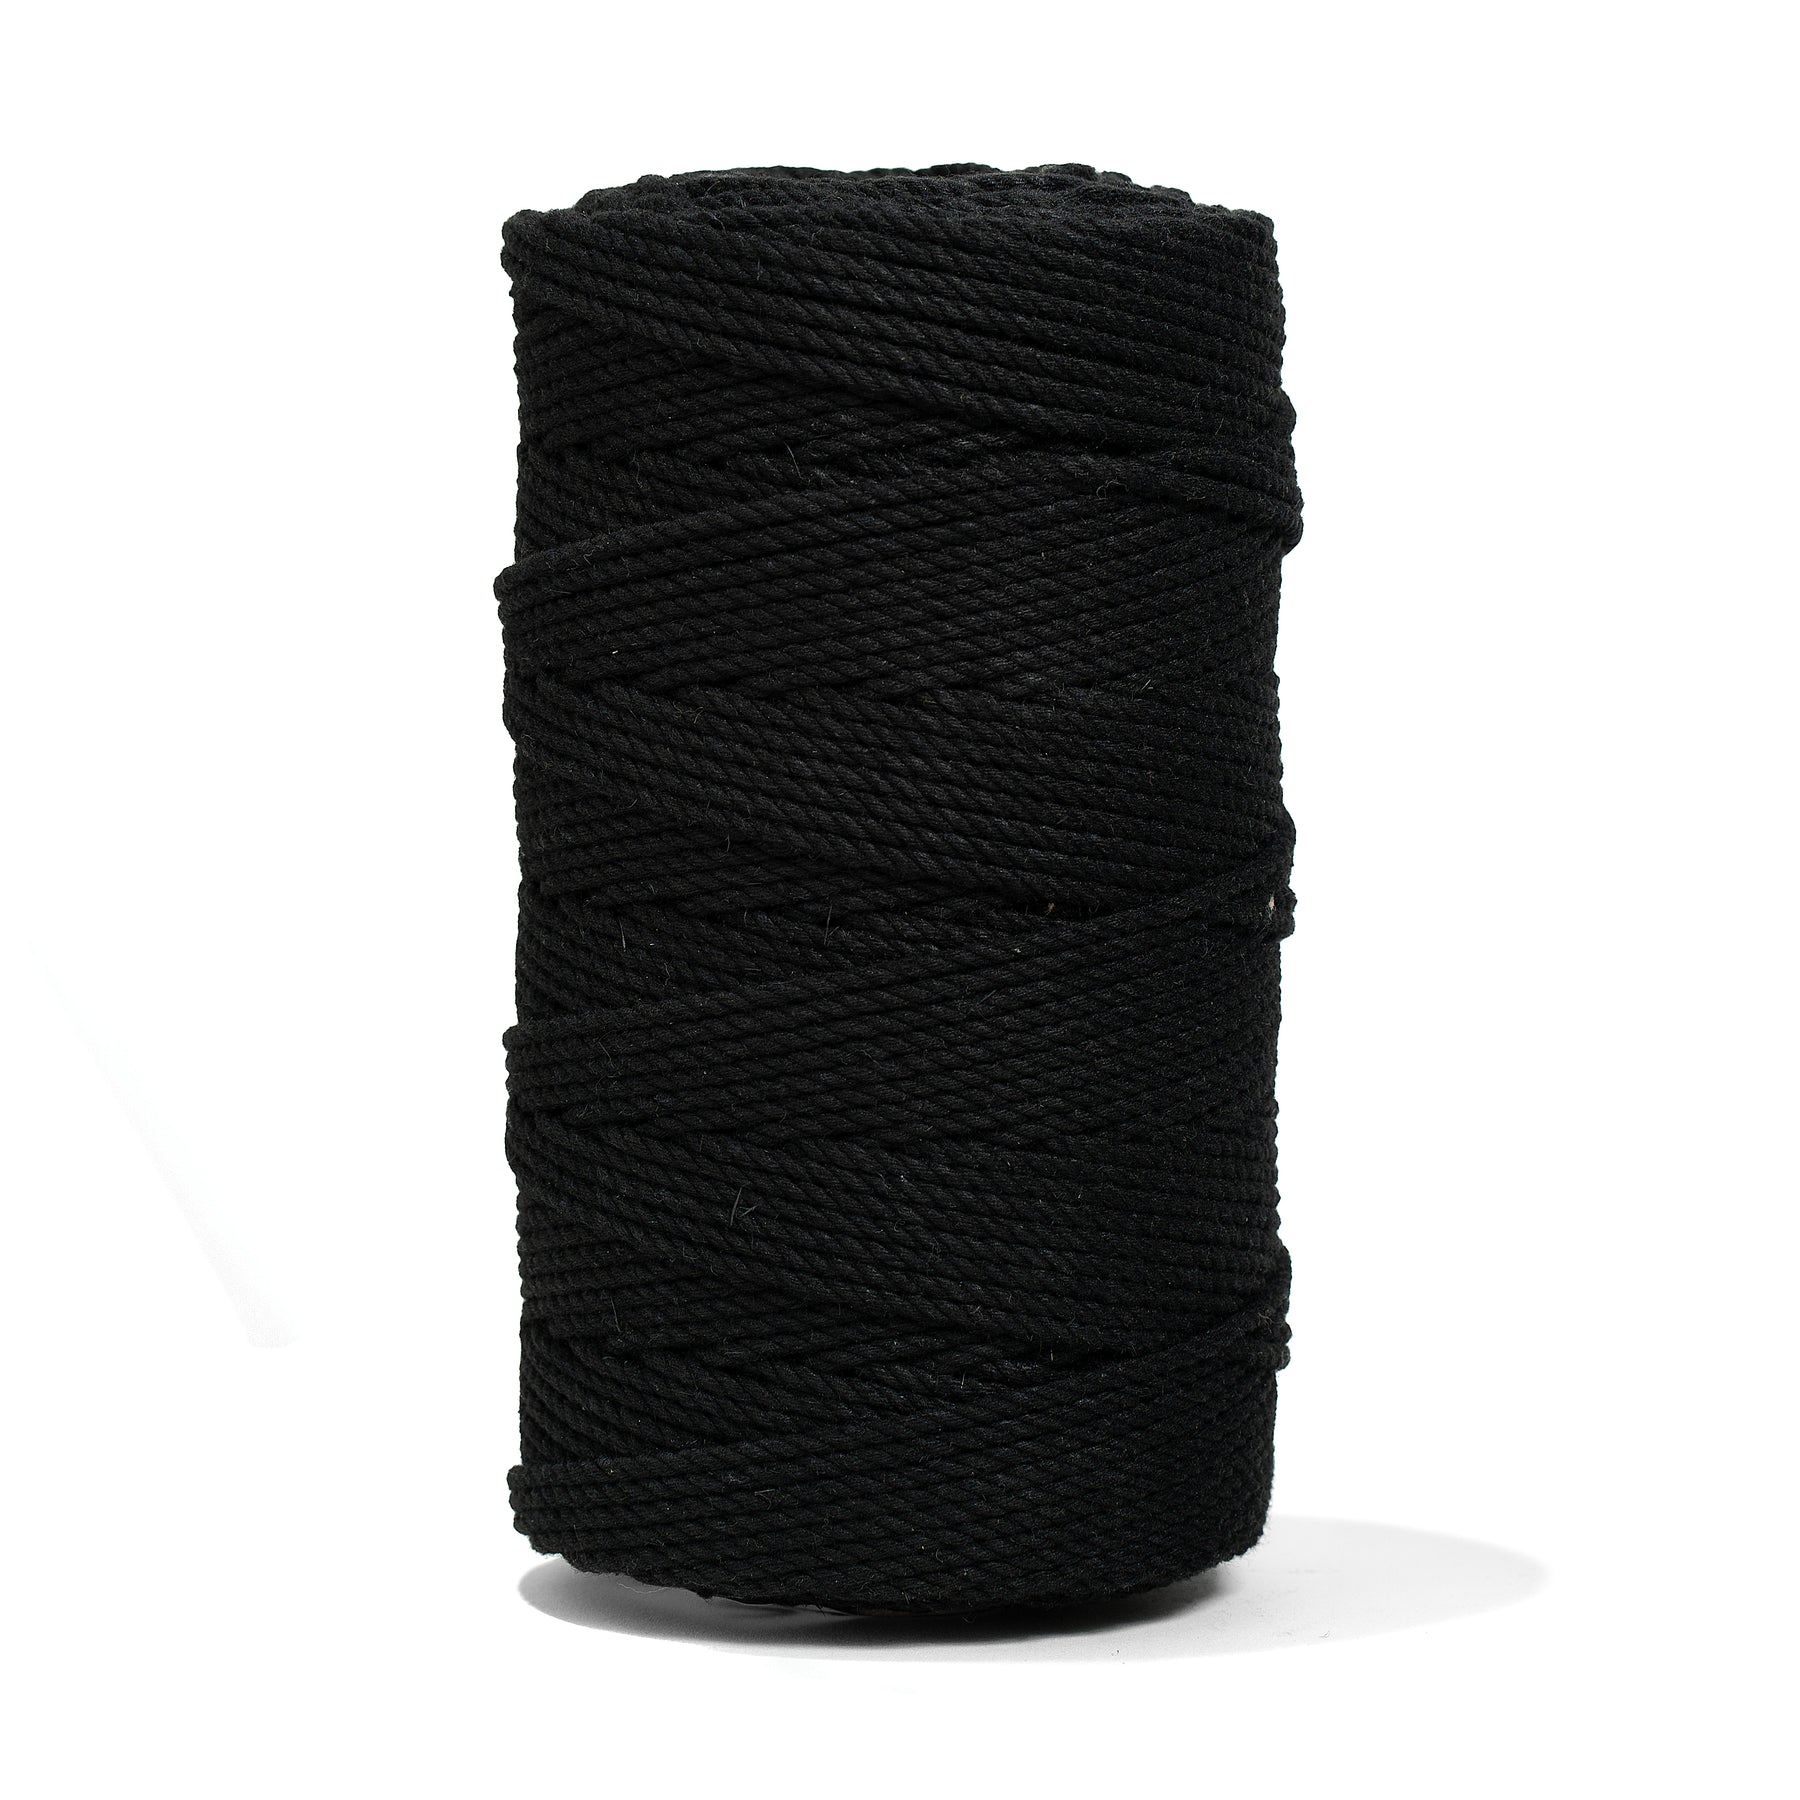 MACRAME COTTON ROPE 2 MM - 3 PLY - BLACK COLOR – Ganxxet